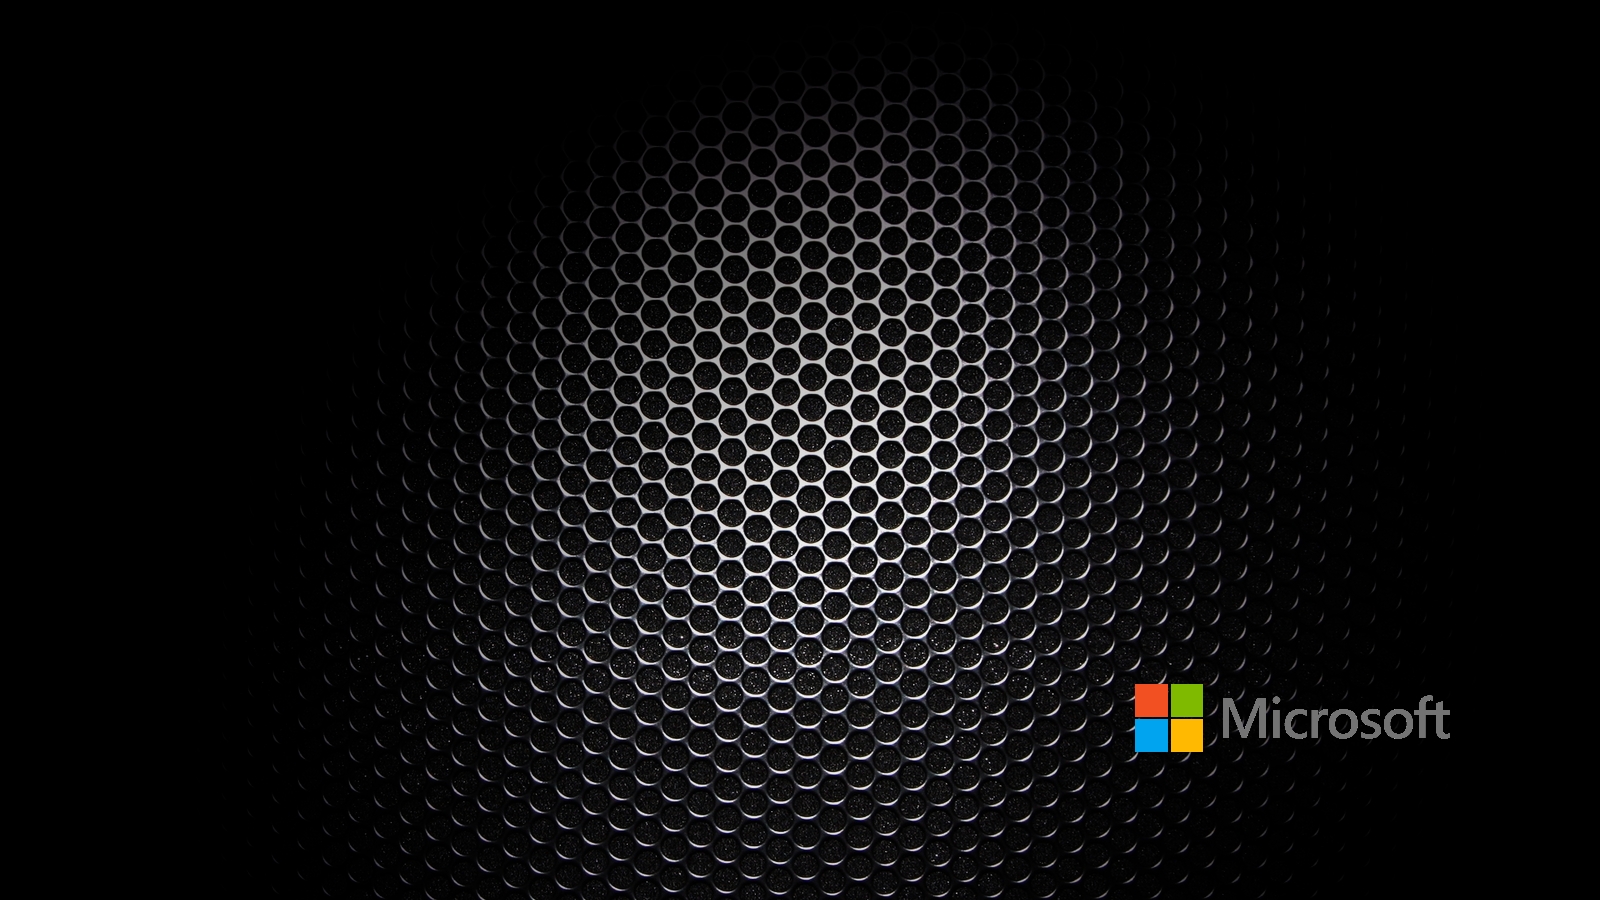 Microsoft Wallpaper Related Keywords amp Suggestions